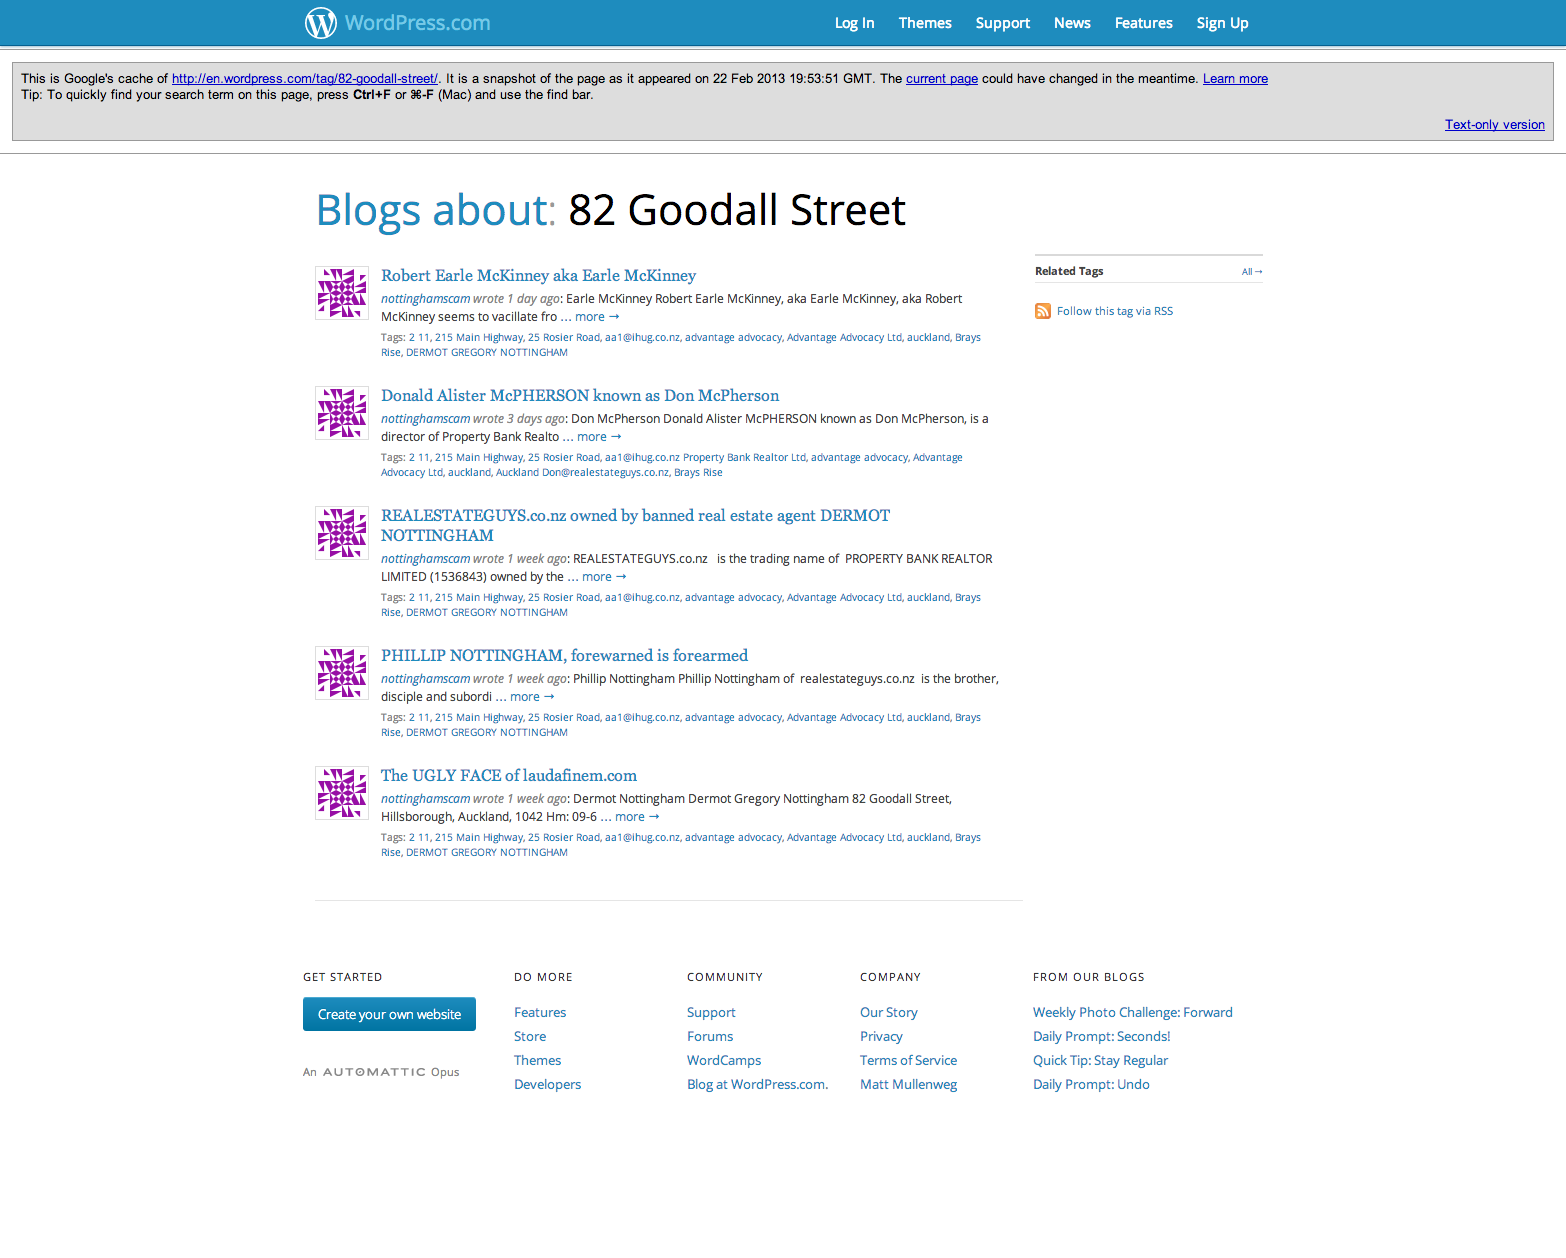 82 Goodall Street — Blogs  Pictures  and more on WordPress